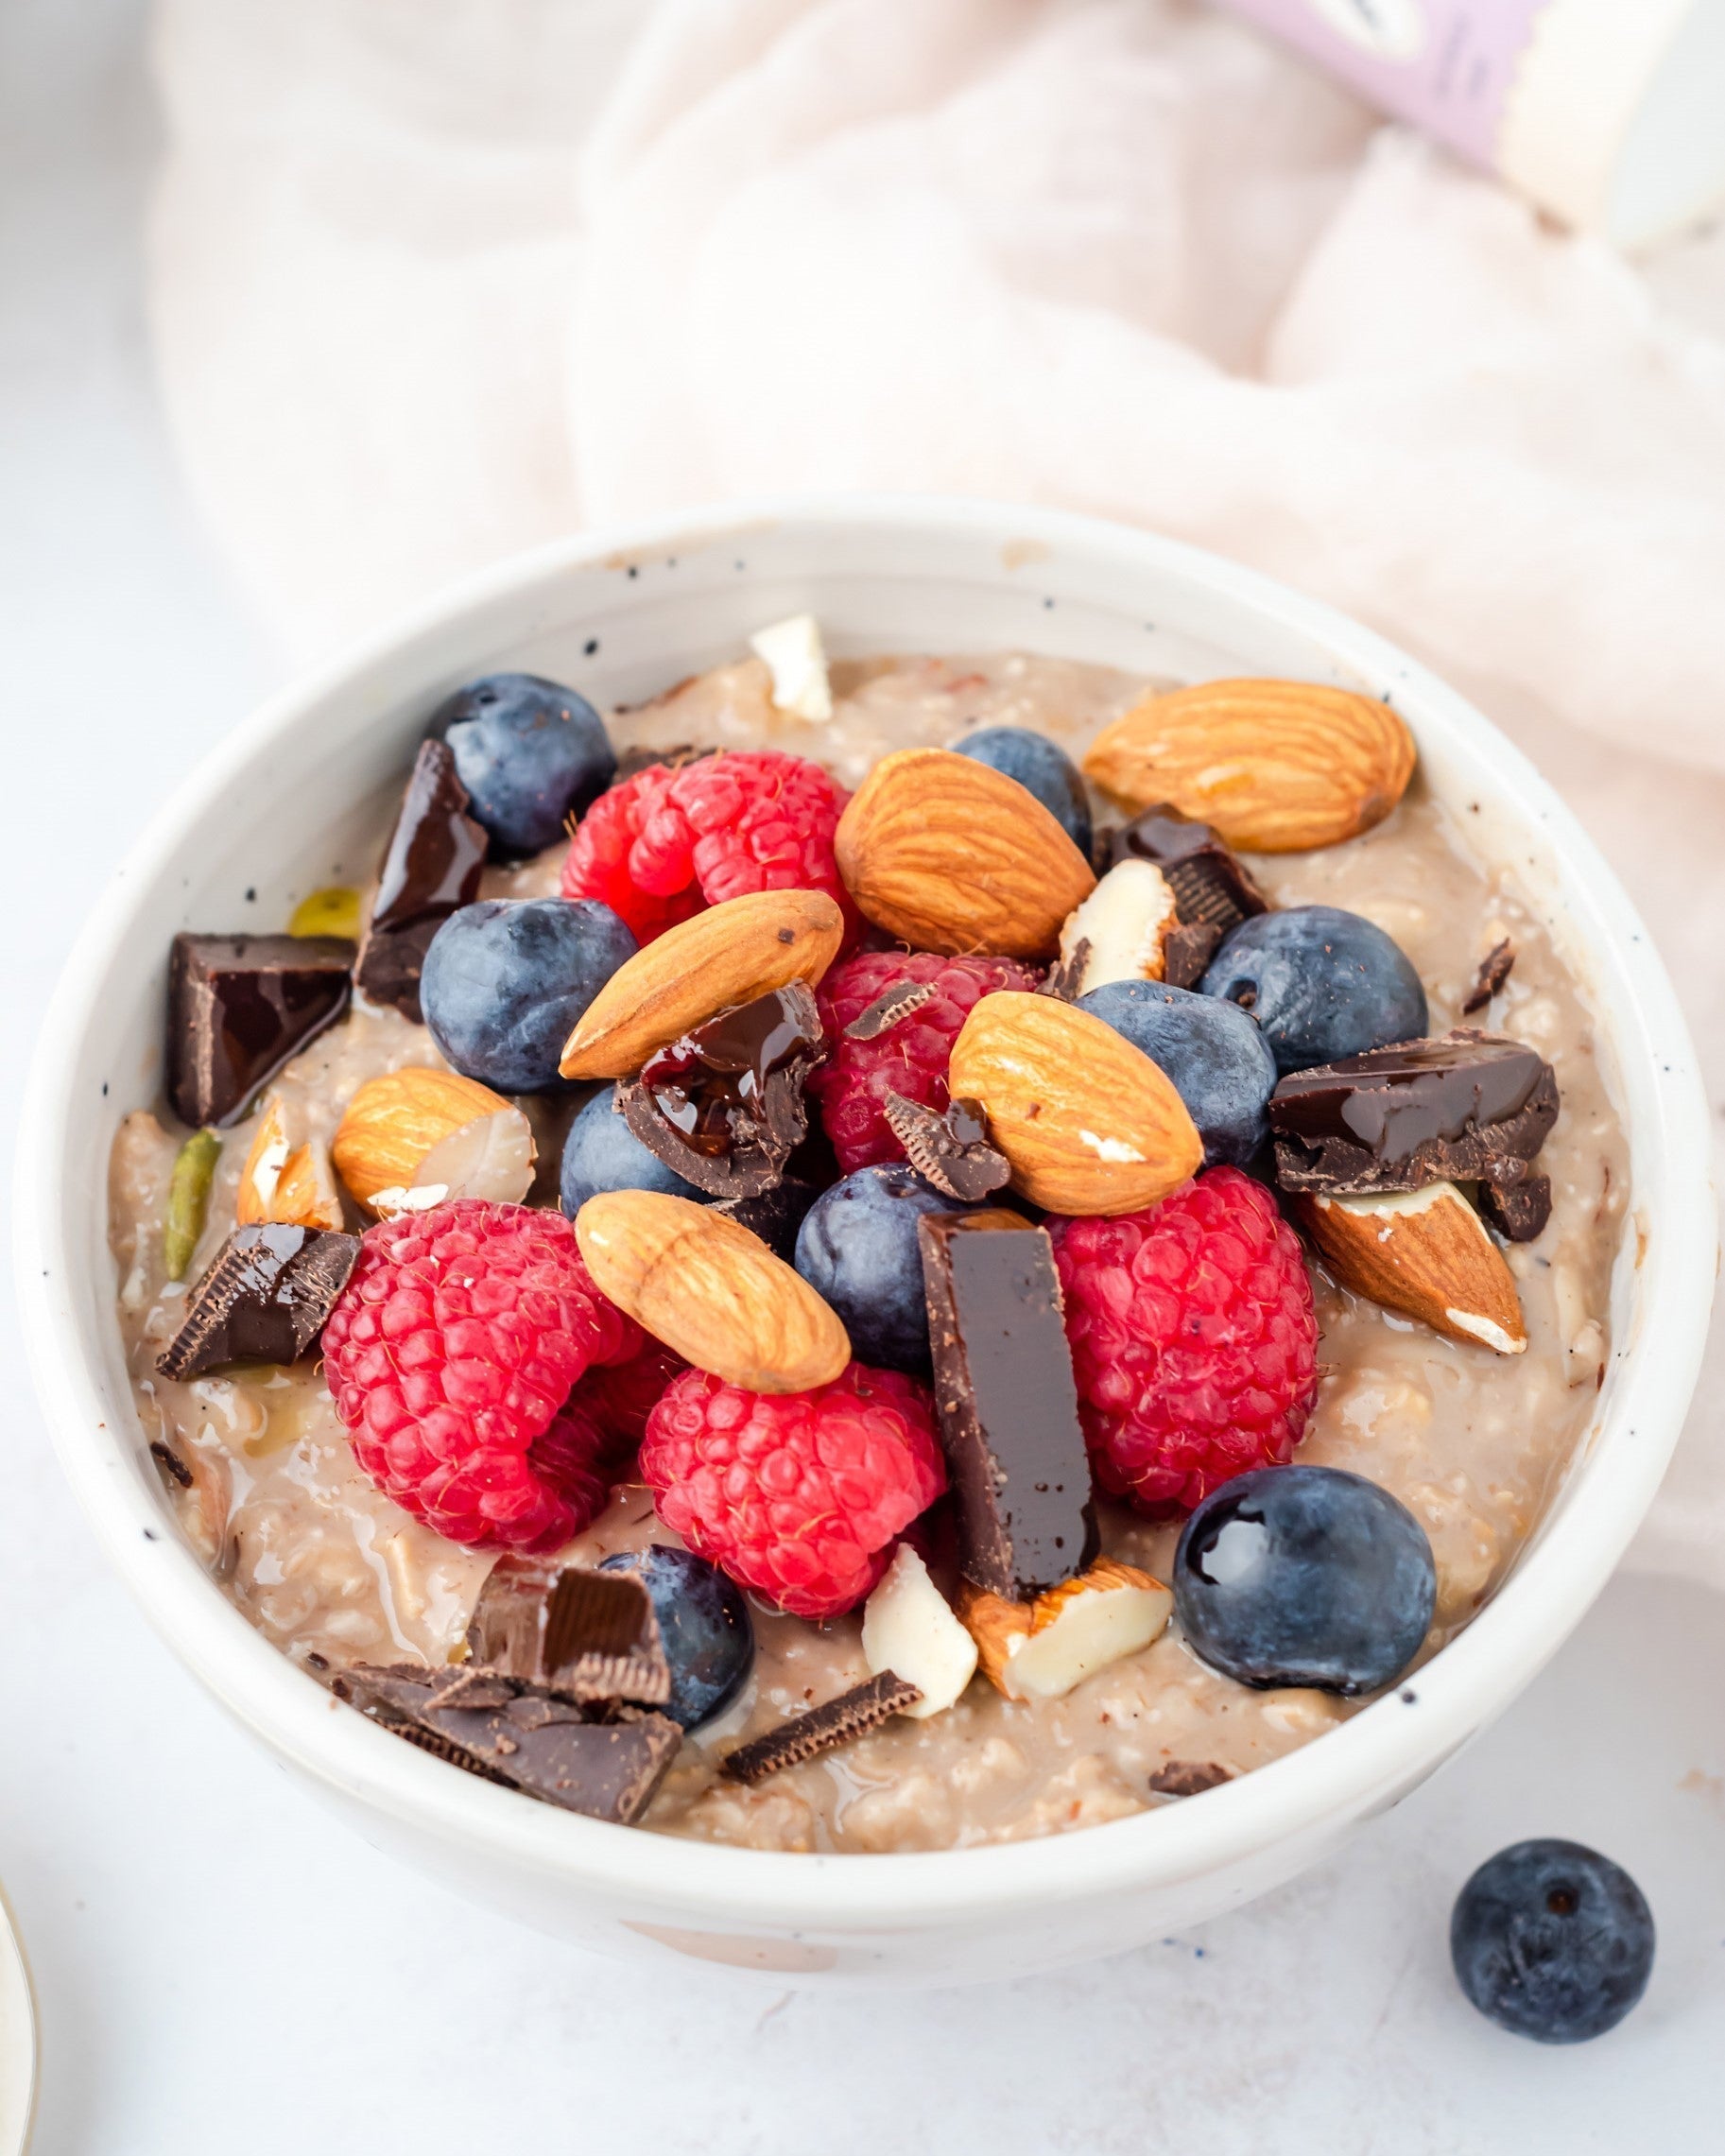 How Much Protein Is in Oatmeal?